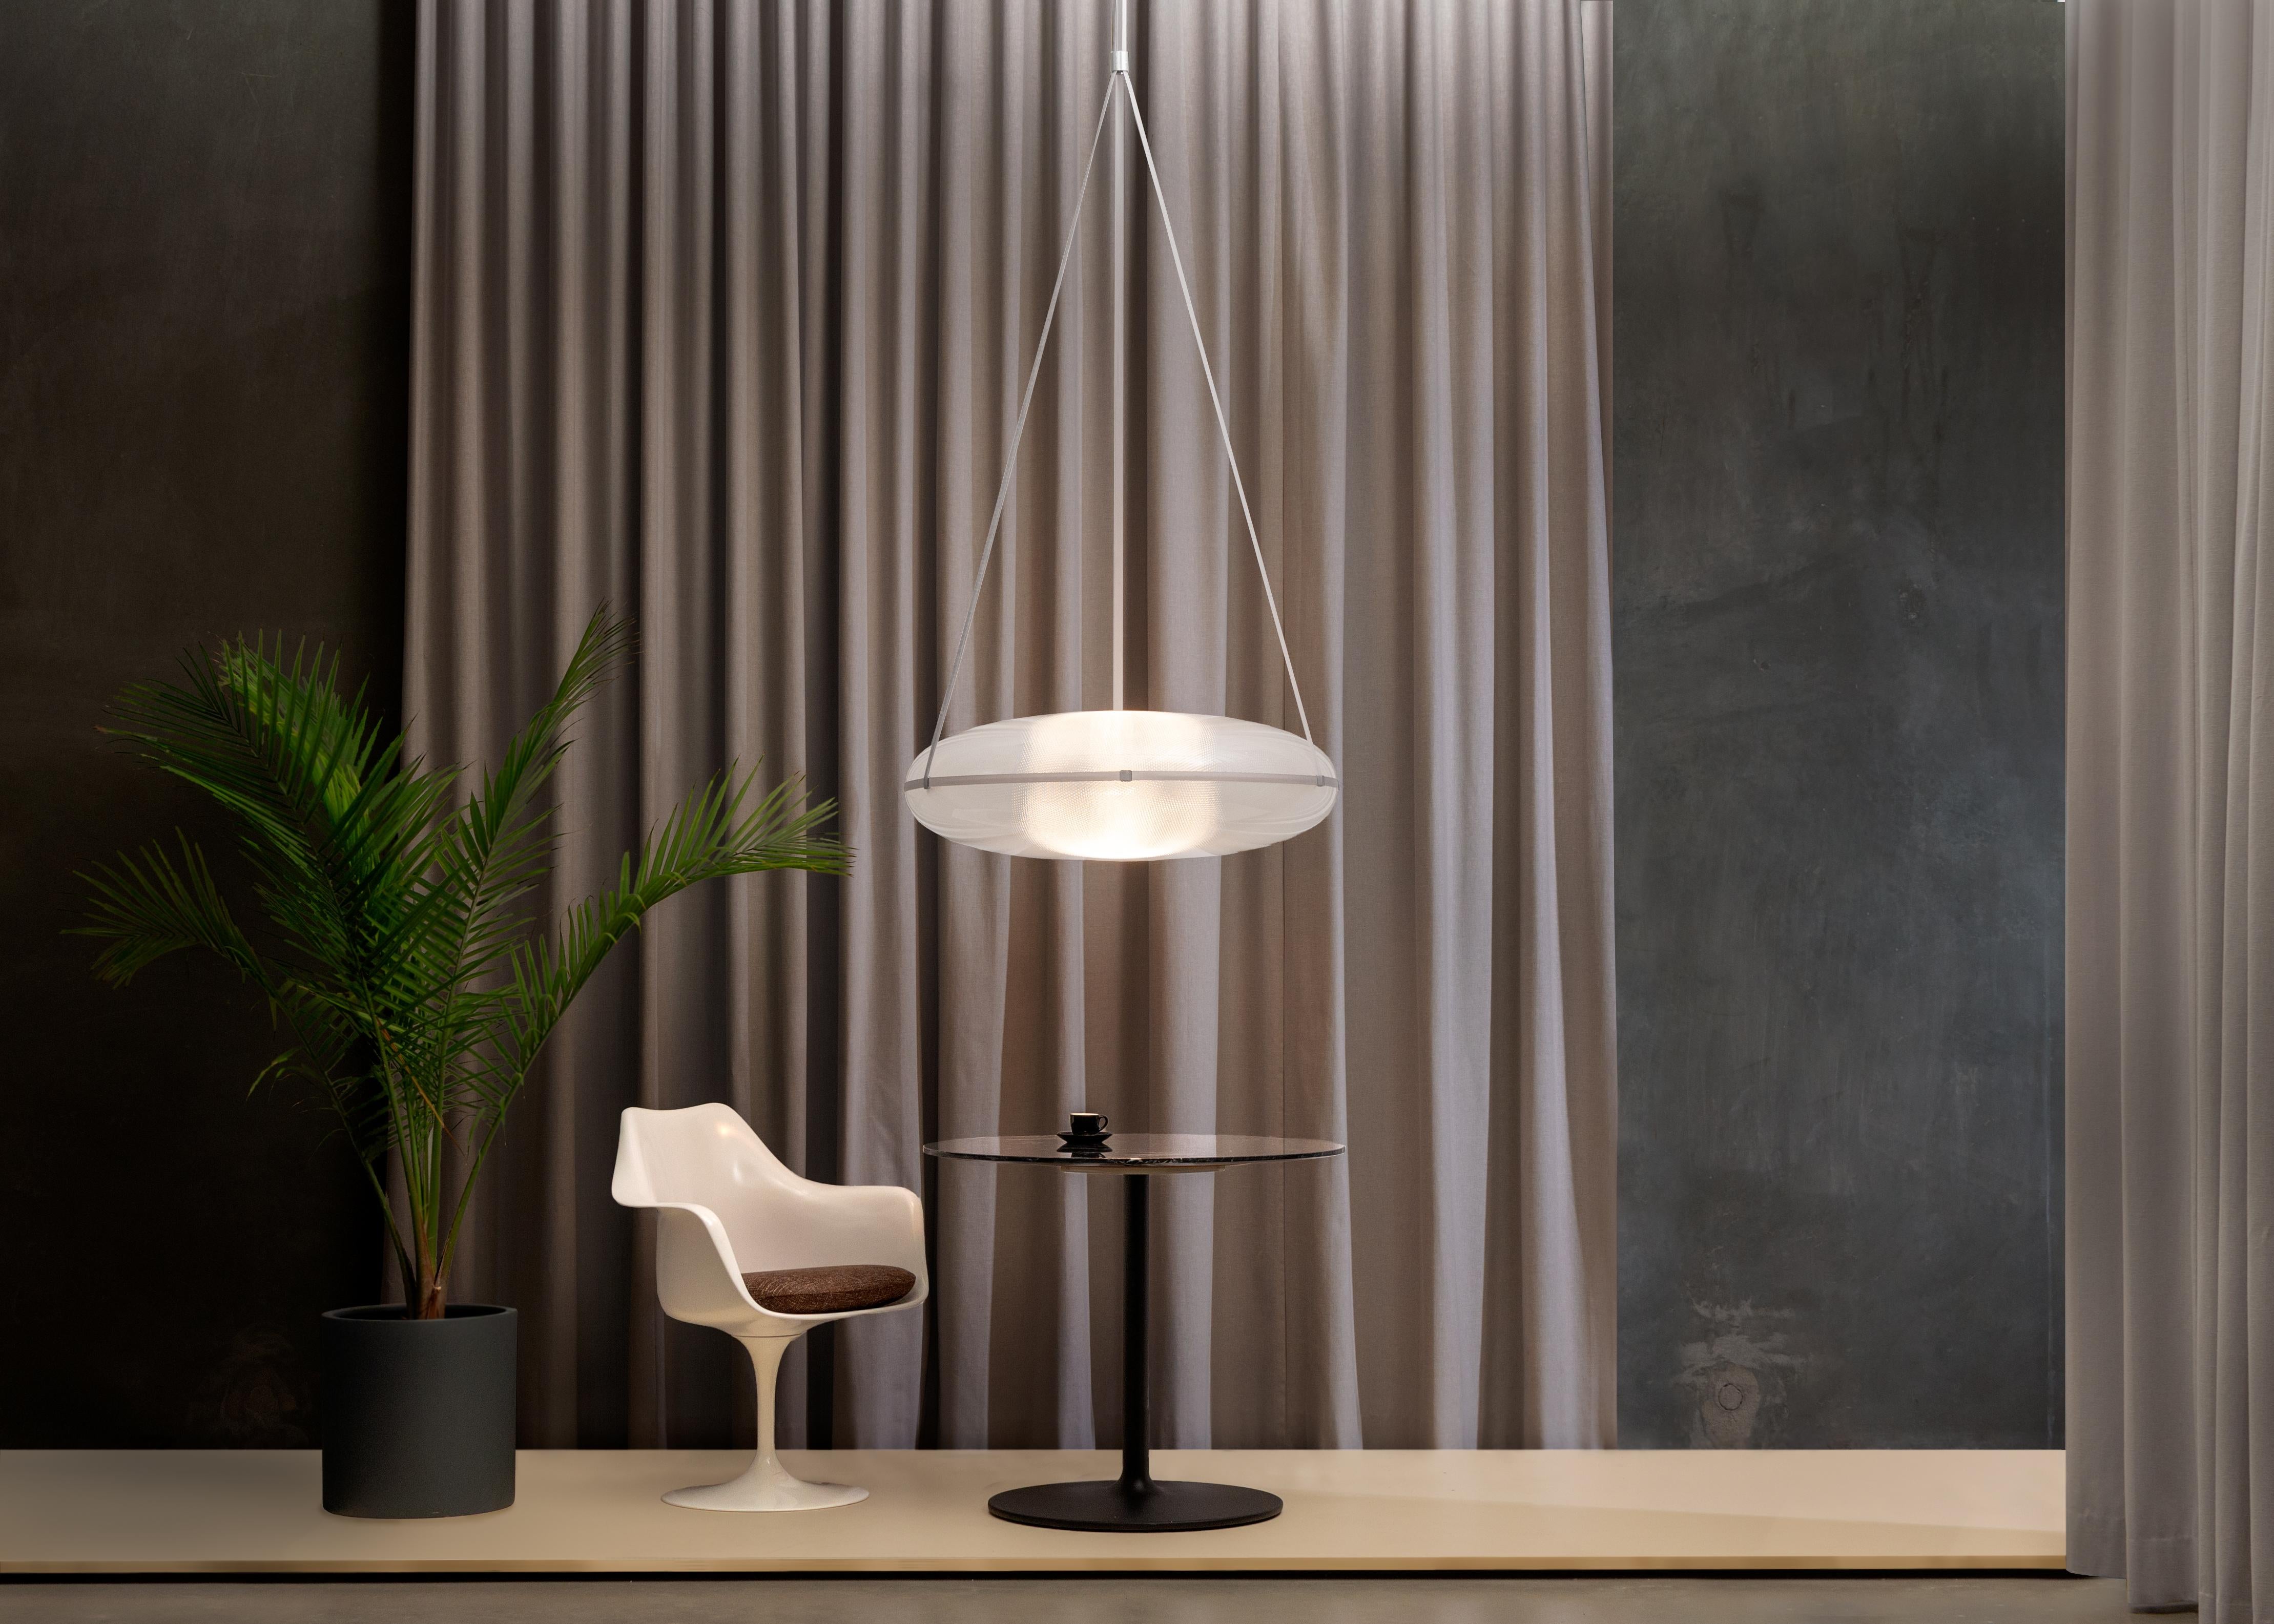 Contemporary pendant lamp 'Iris'

Electrical : 
Voltage: 120 V – 277 V 
Lamp: Integral 34 W 35 V DC LED

The model shown in picture:
- Diameter: 90 cm Height. 30 cm 
- Finish: Silver
- Wire height: 300 cm (adjustable drop length)
- Modules : B and